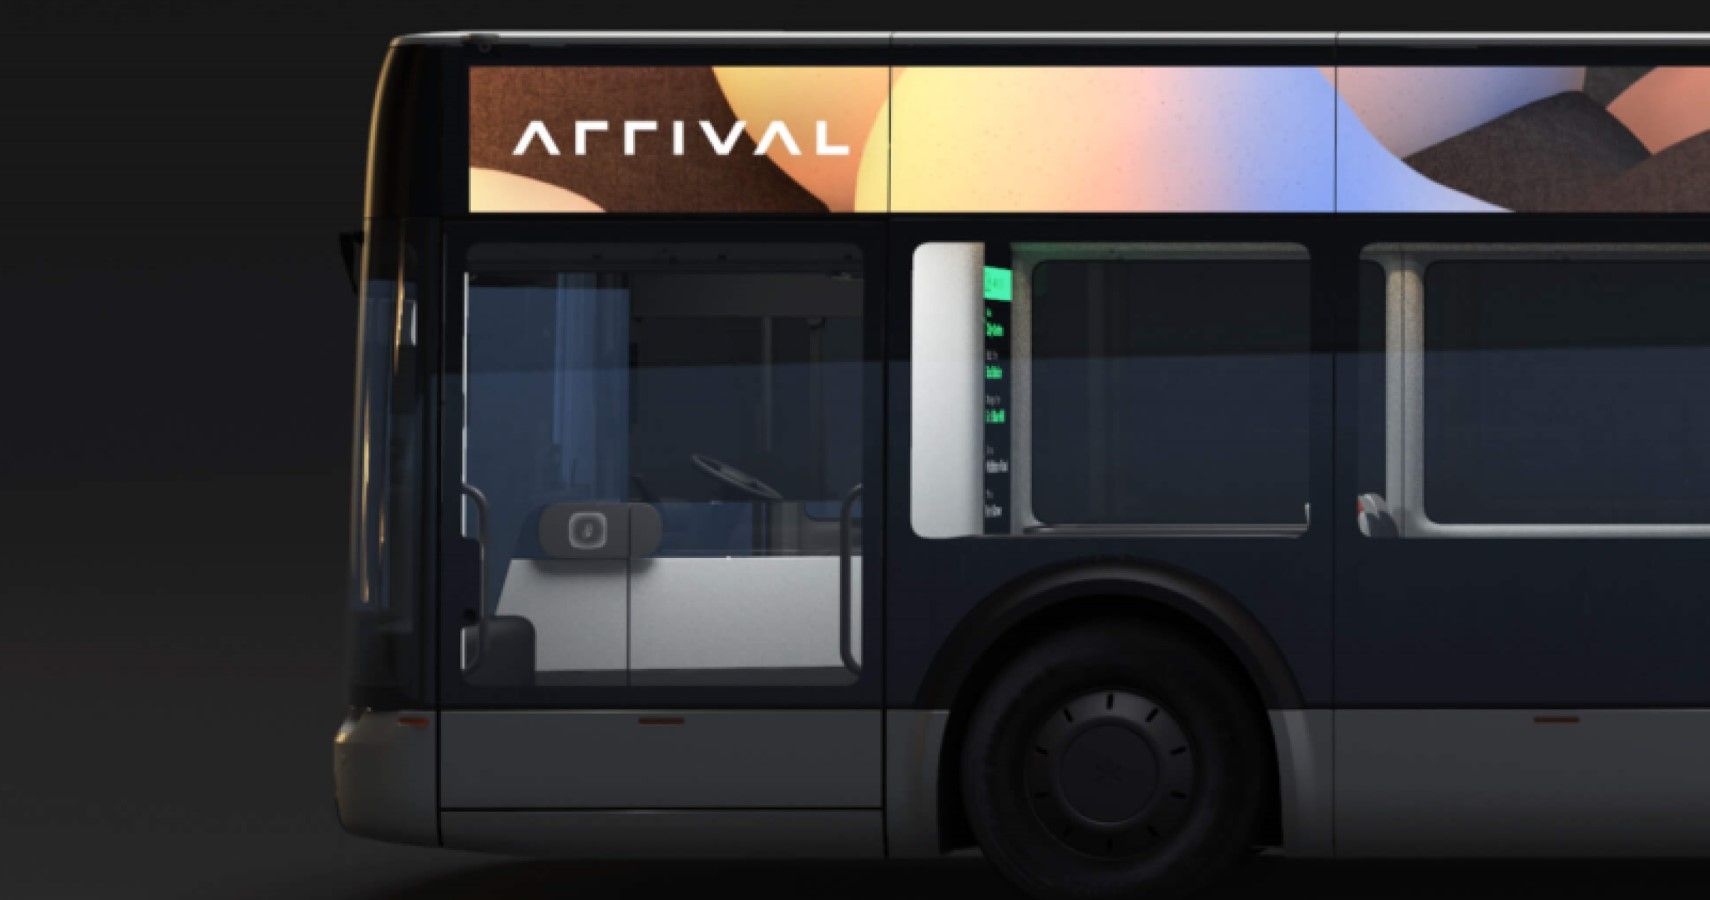 Arrival Bus LED displays on the exterior